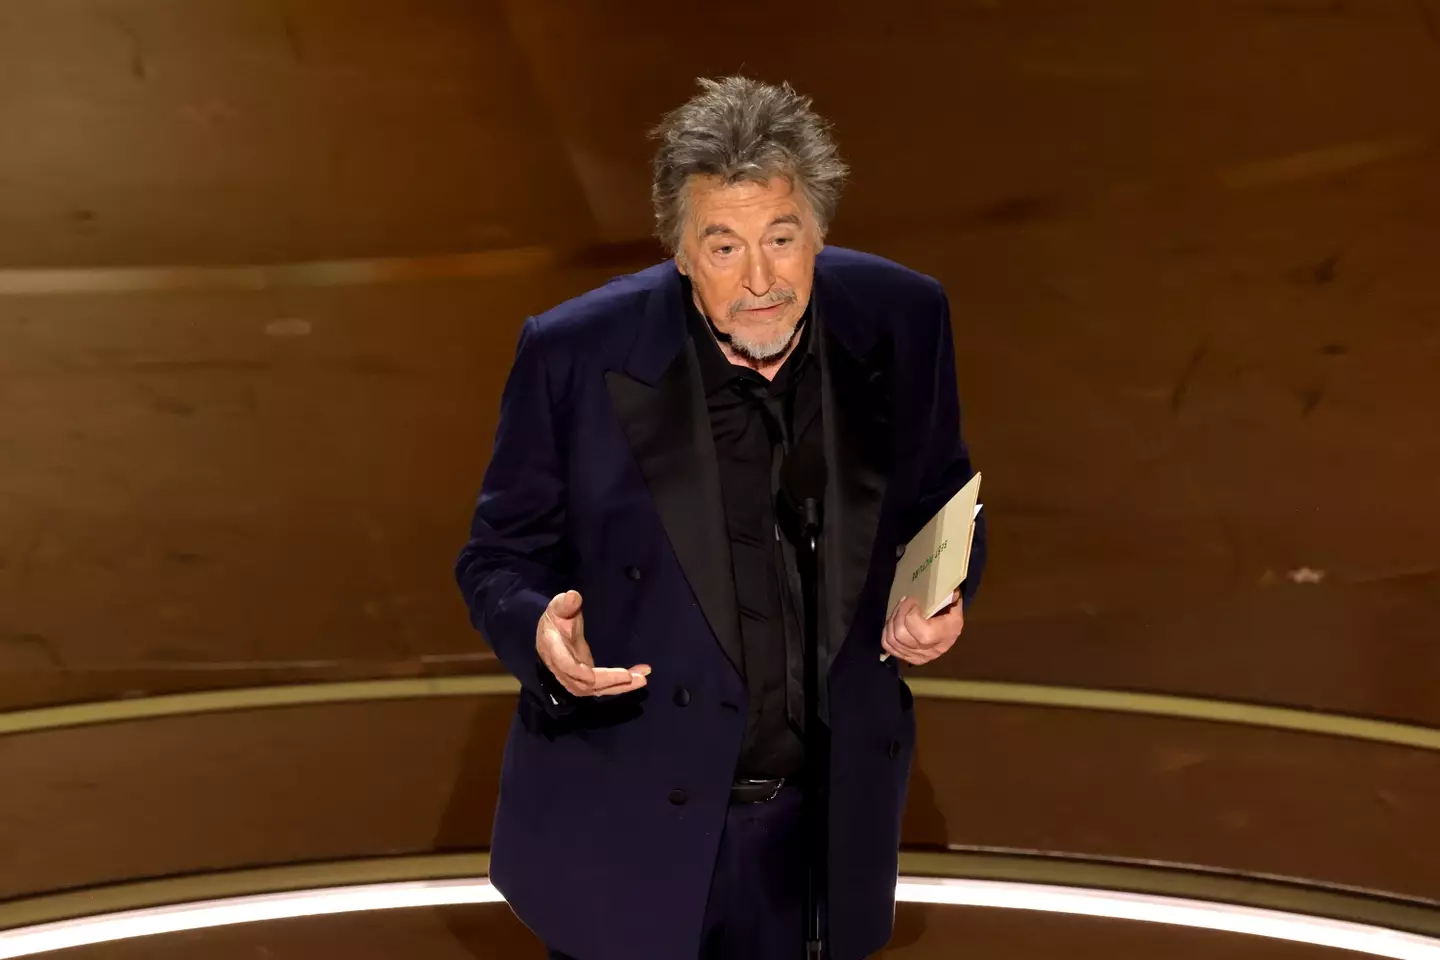 Al Pacino caused chaos at the Oscars after failing to announce the Best Picture nominees.